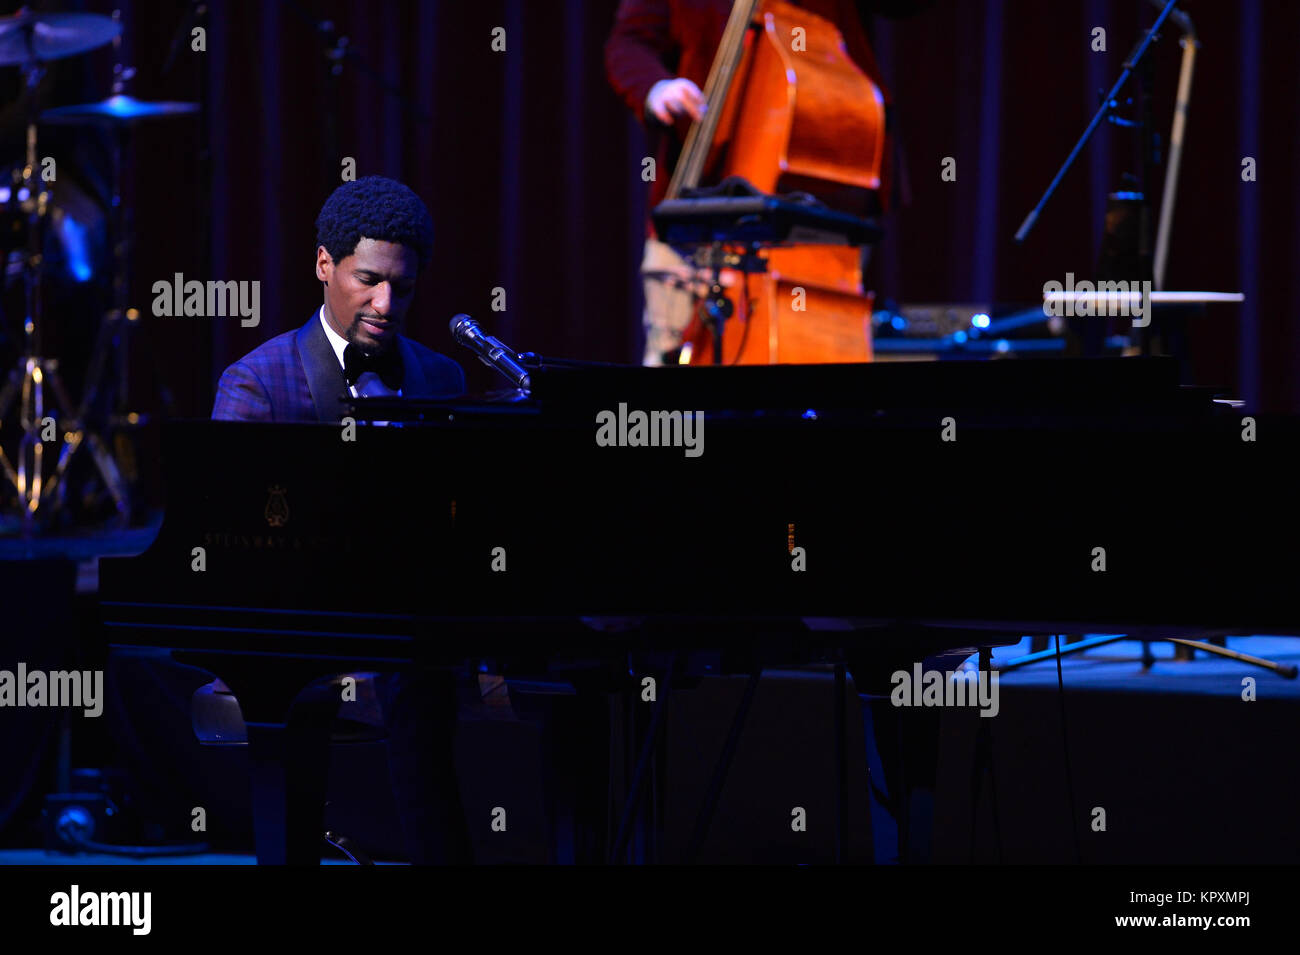 Miami, FL, USA. 15th Dec, 2017. Jon Batiste performs and ring in the holiday season with the 'Jon Batiste and Stay Human' band for The Late Show with Stephen Colbert at Adrienne Arsht Center on December 15, 2017 in Miami, Florida. Credit: Mpi10/Media Punch/Alamy Live News Stock Photo